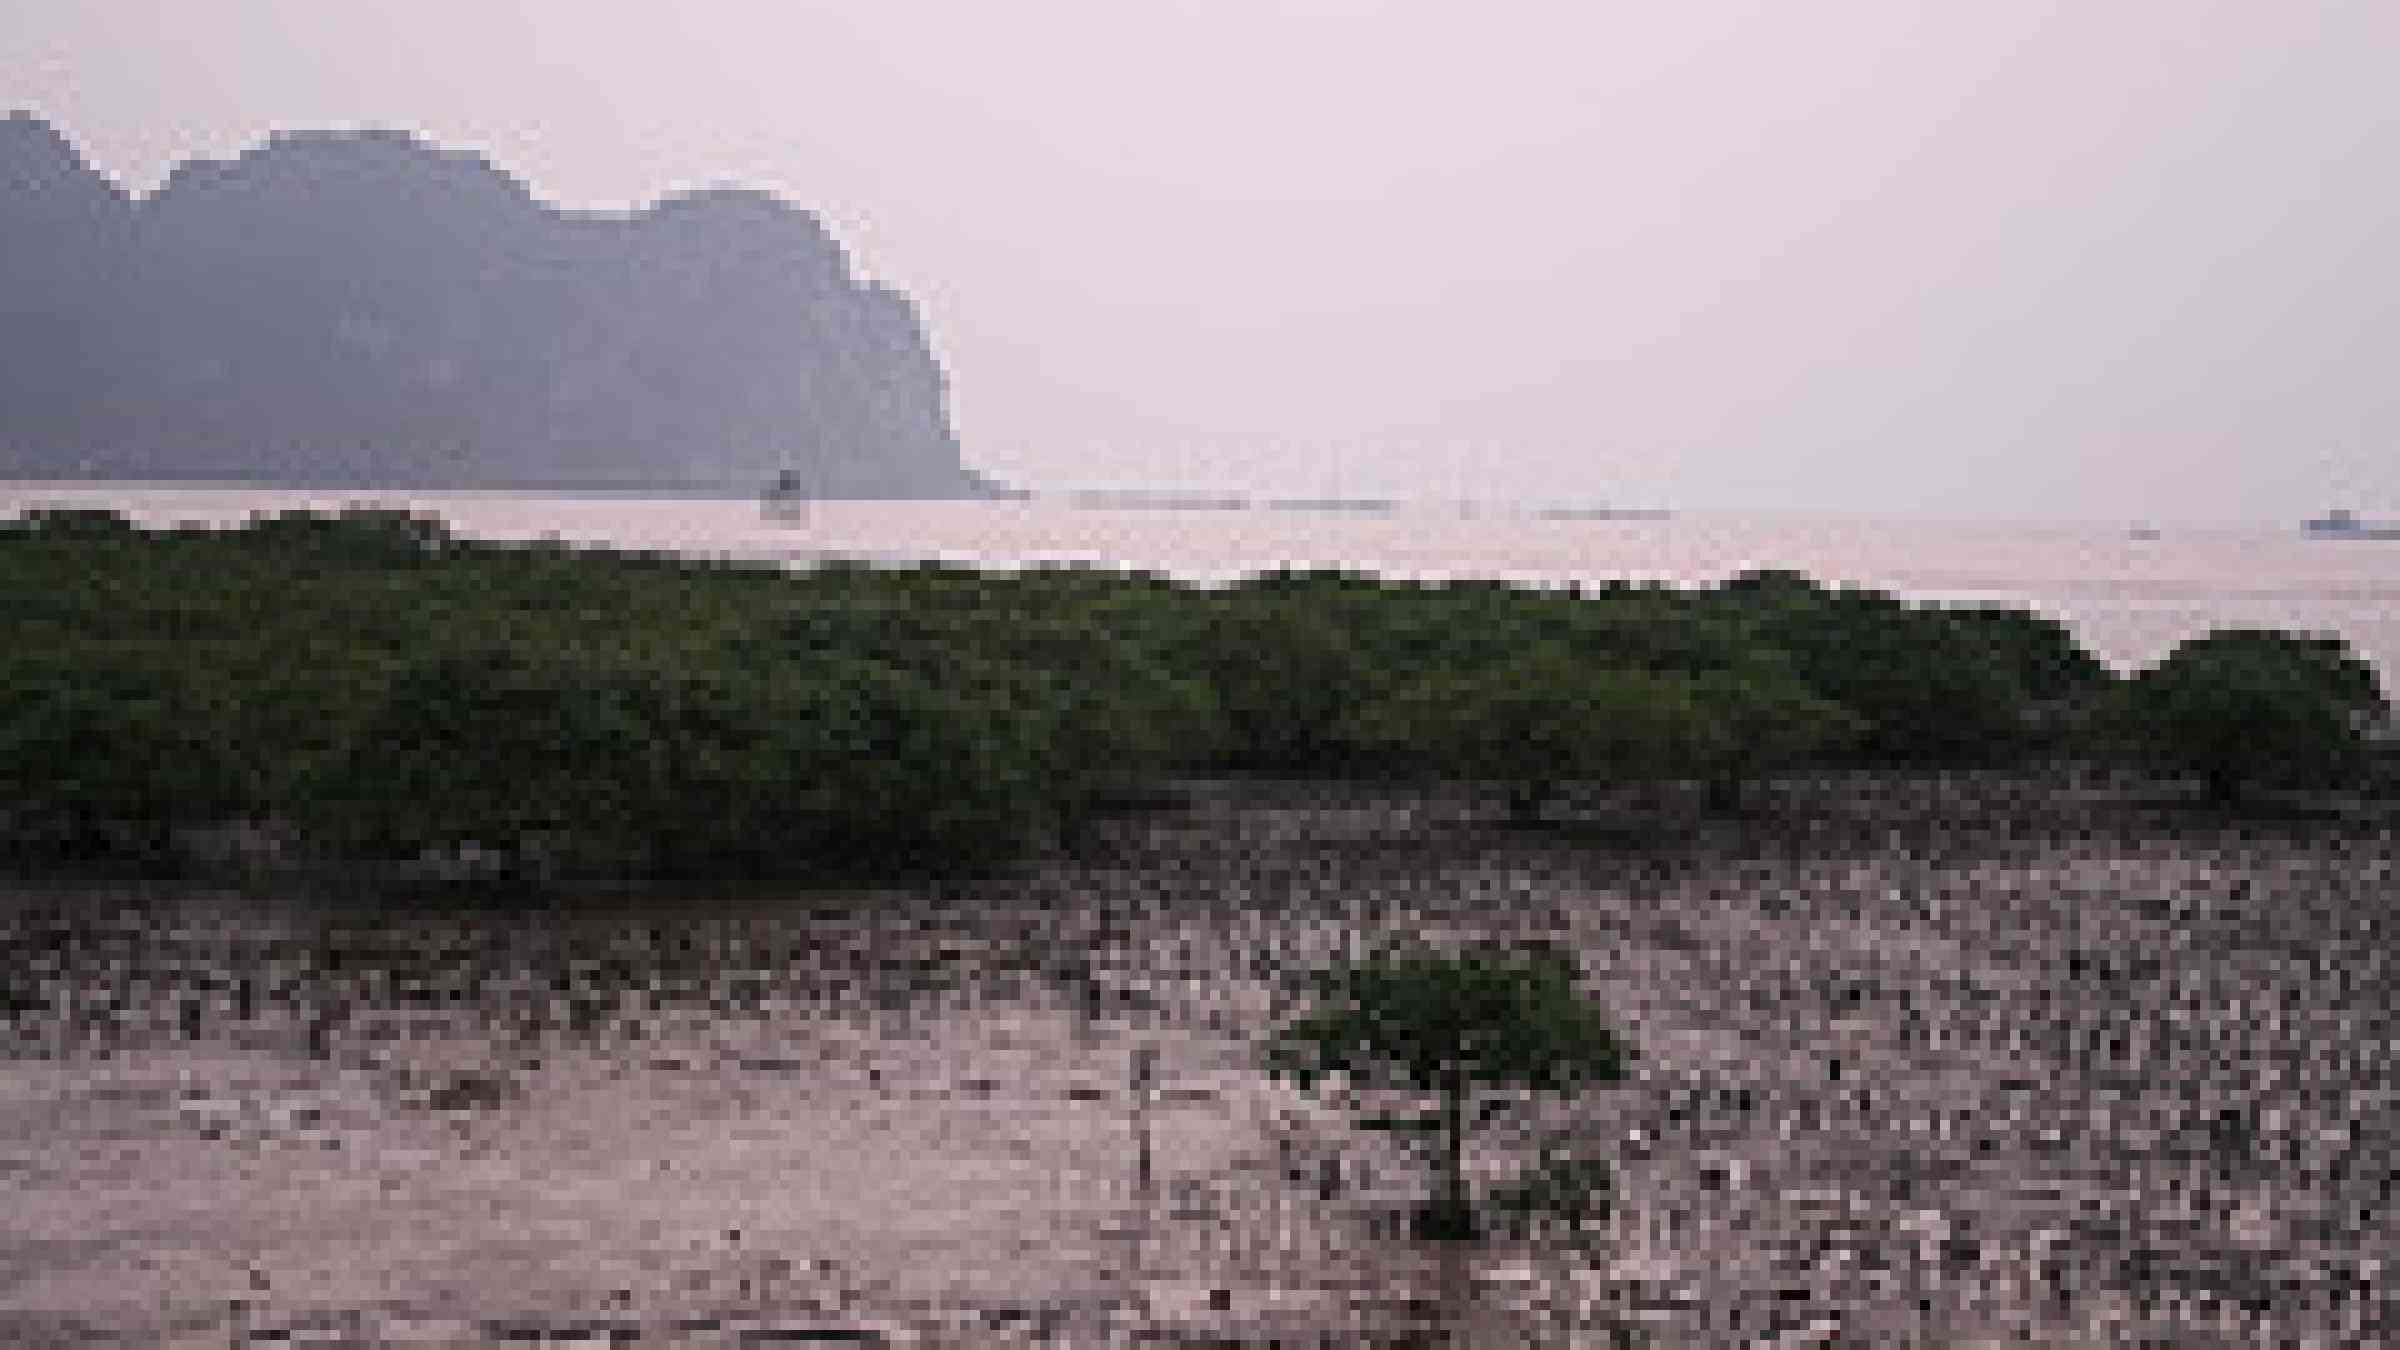 mangroves, Cat Ba, Halong Bay by flickr user mixedeyes under creative commons attribution-noncommercial-share alike 2.0